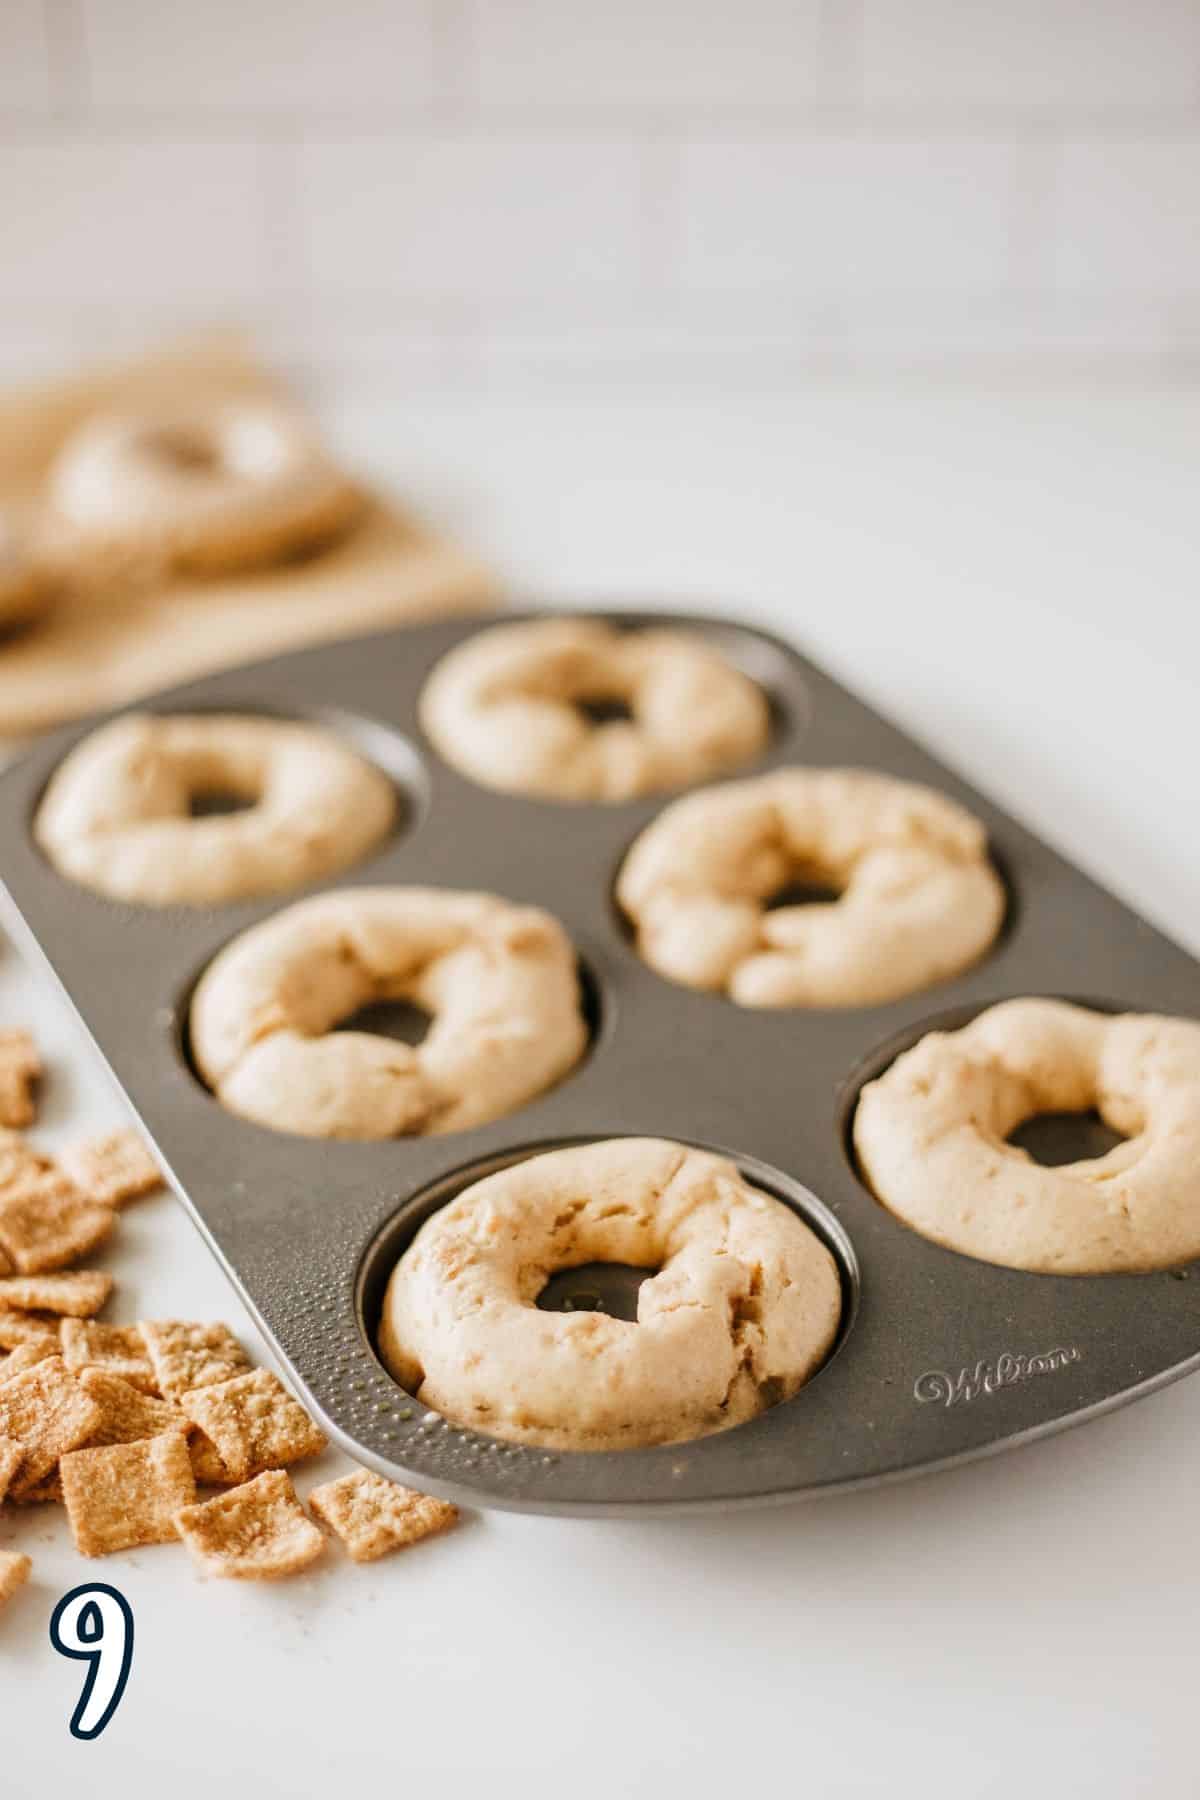 Just baked cinnamon toast crunch donuts. 